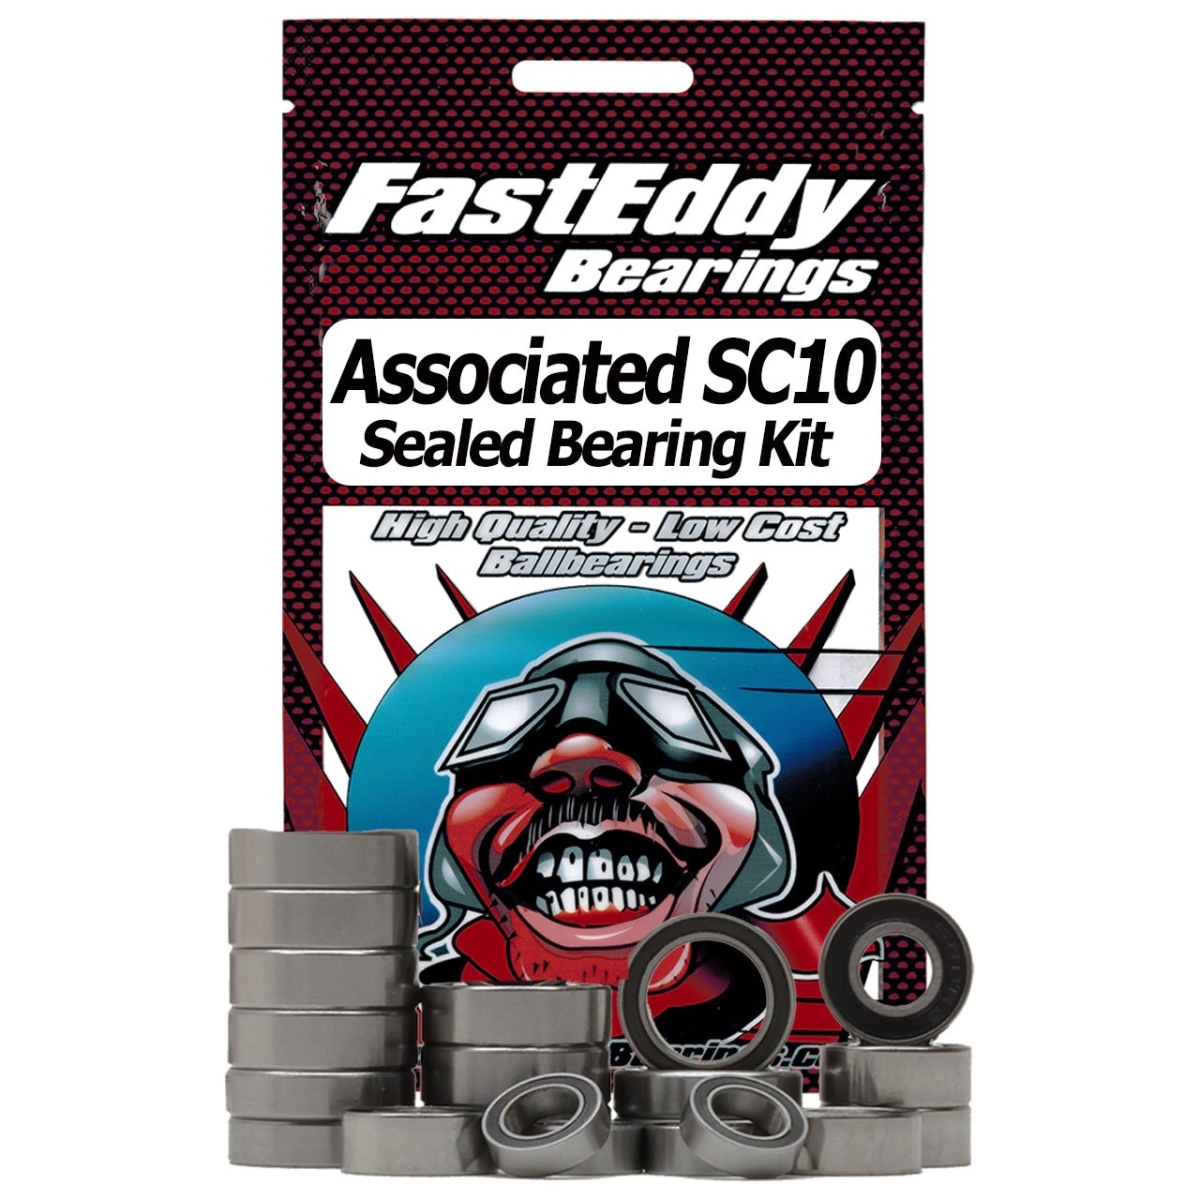 TFE209 Associated SC10 2WD Sealed Bearing Kit -  FastEddy